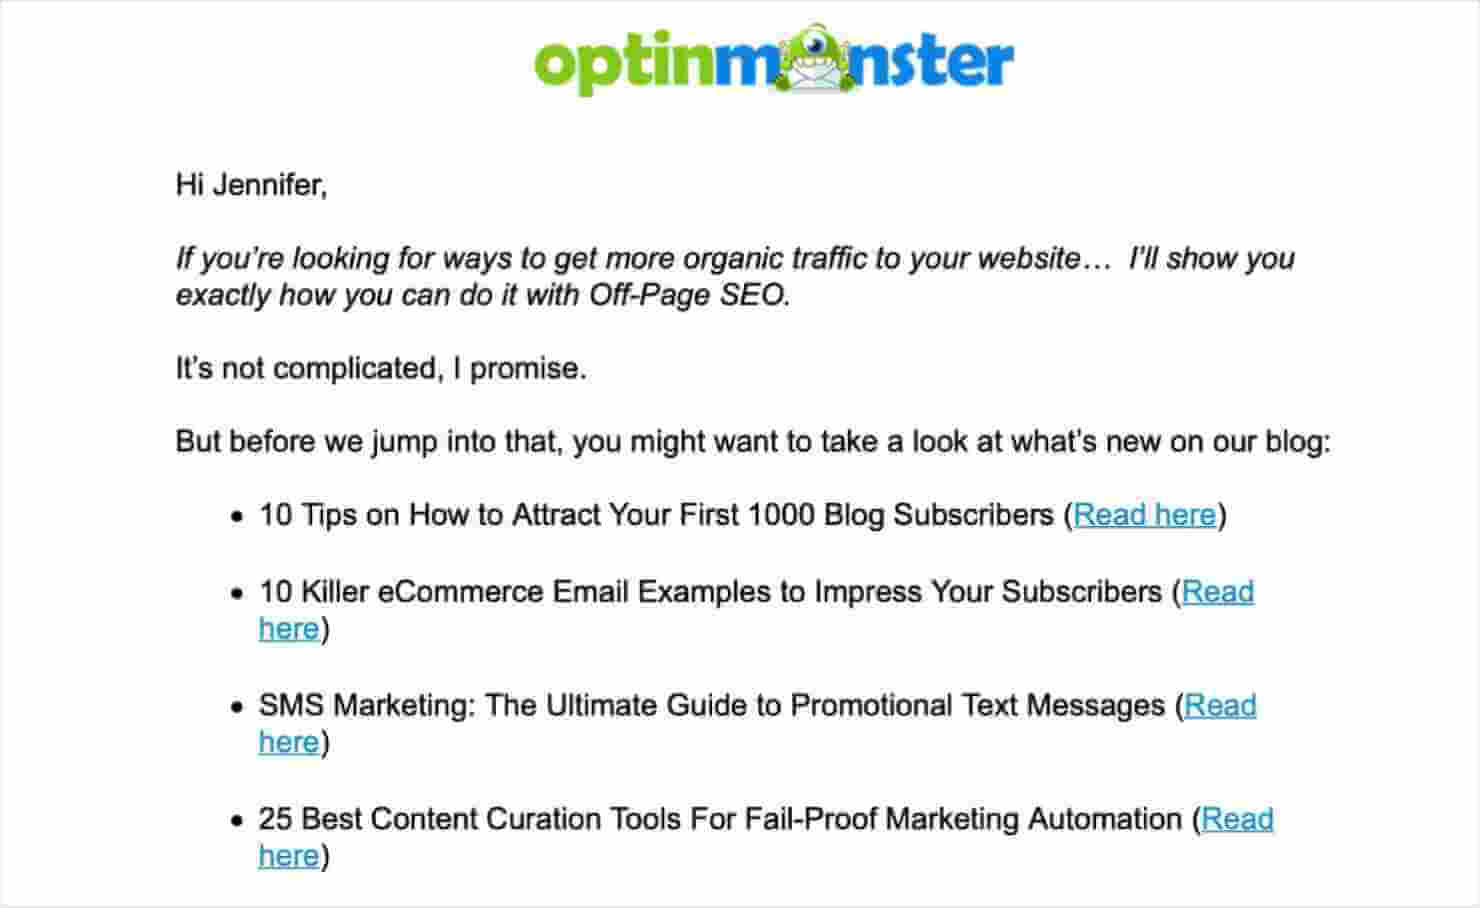 Email from Optinmonster that says "Hi Jennifer, If you're looking for ways to get more organic traffic to your website... I'll show you exactly how you can do it with Off-Page SEO. It's not complicated, I promise. But before we jump into that, you might want to take a look at what's new on our blog:" Then there's a bulleted list of links to blog posts.